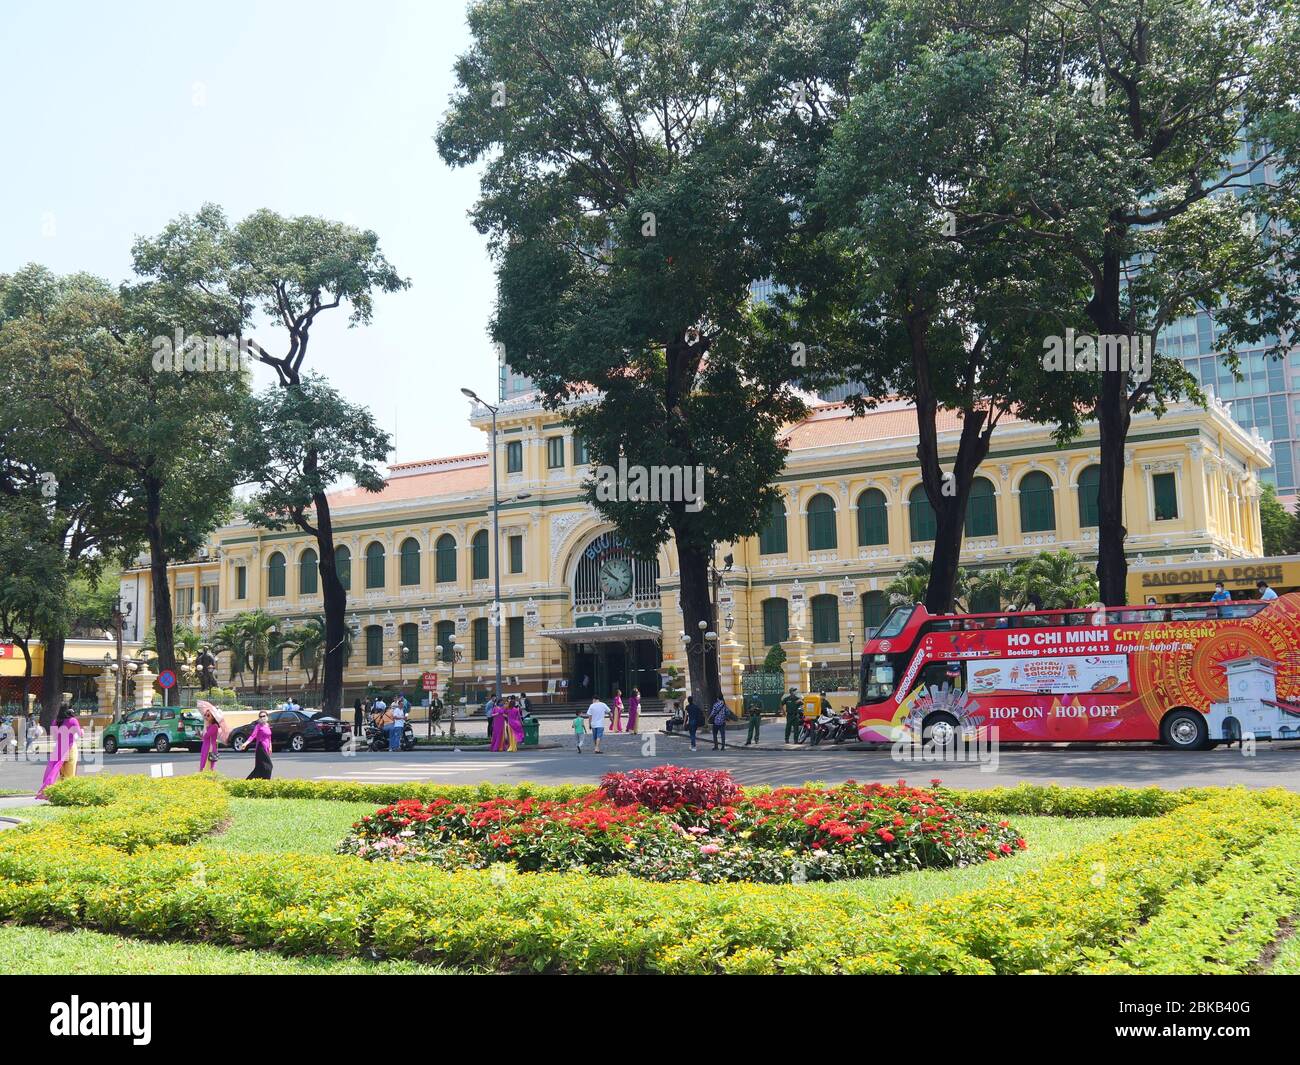 Ho Chi Minh City, Vietnam - April 30, 2020: Central Post Office in Ho Chi Minh city, a popular tourist attraction Stock Photo